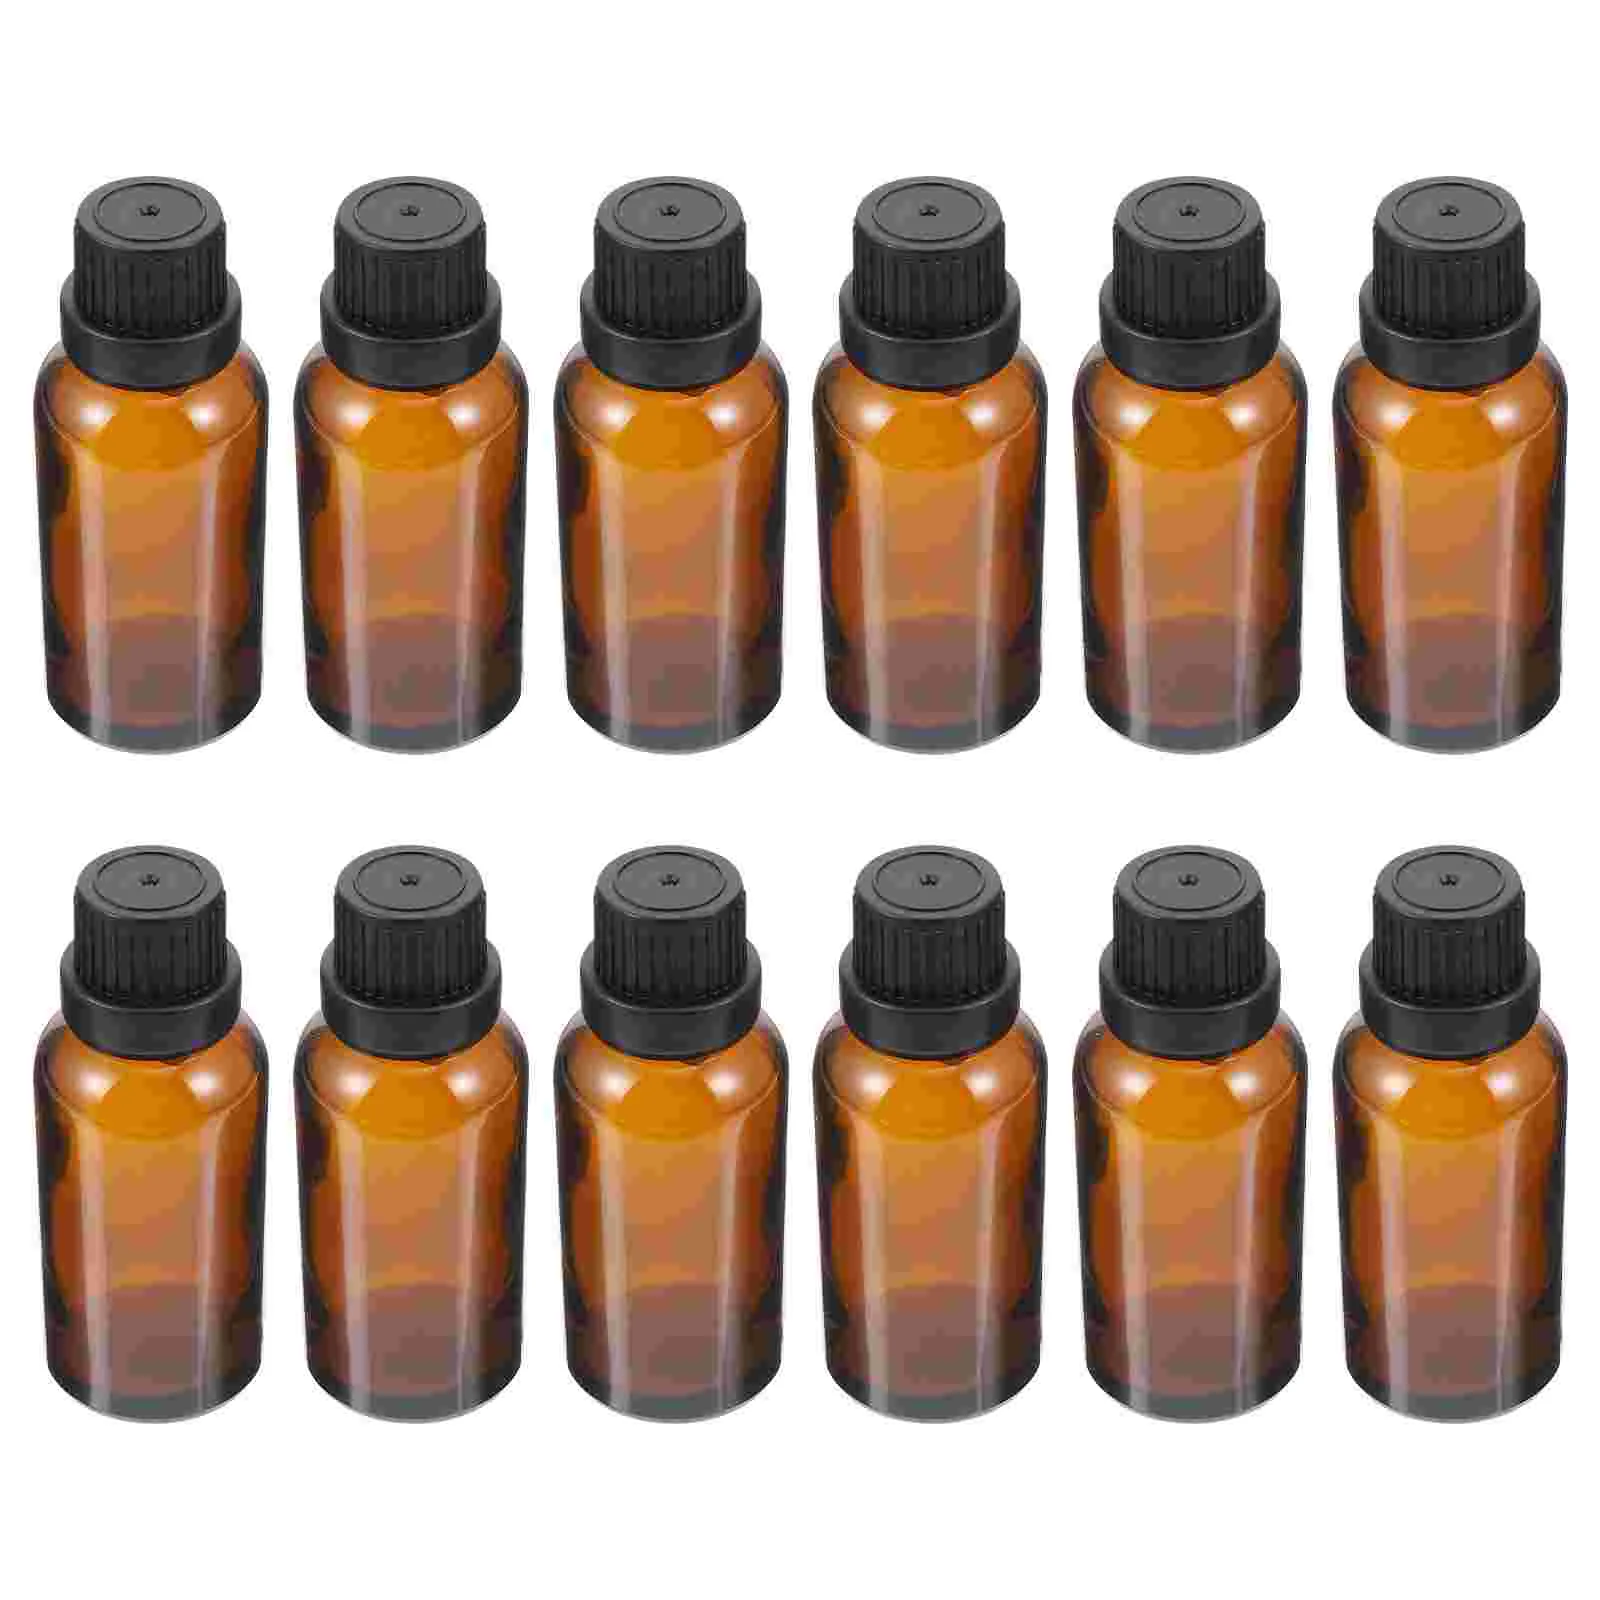 

Bottles Essential Oil Bottle Amber Empty Refillable Vials Sample Oils Mini Storage Cans Perfume Vial Lotion Travel Container